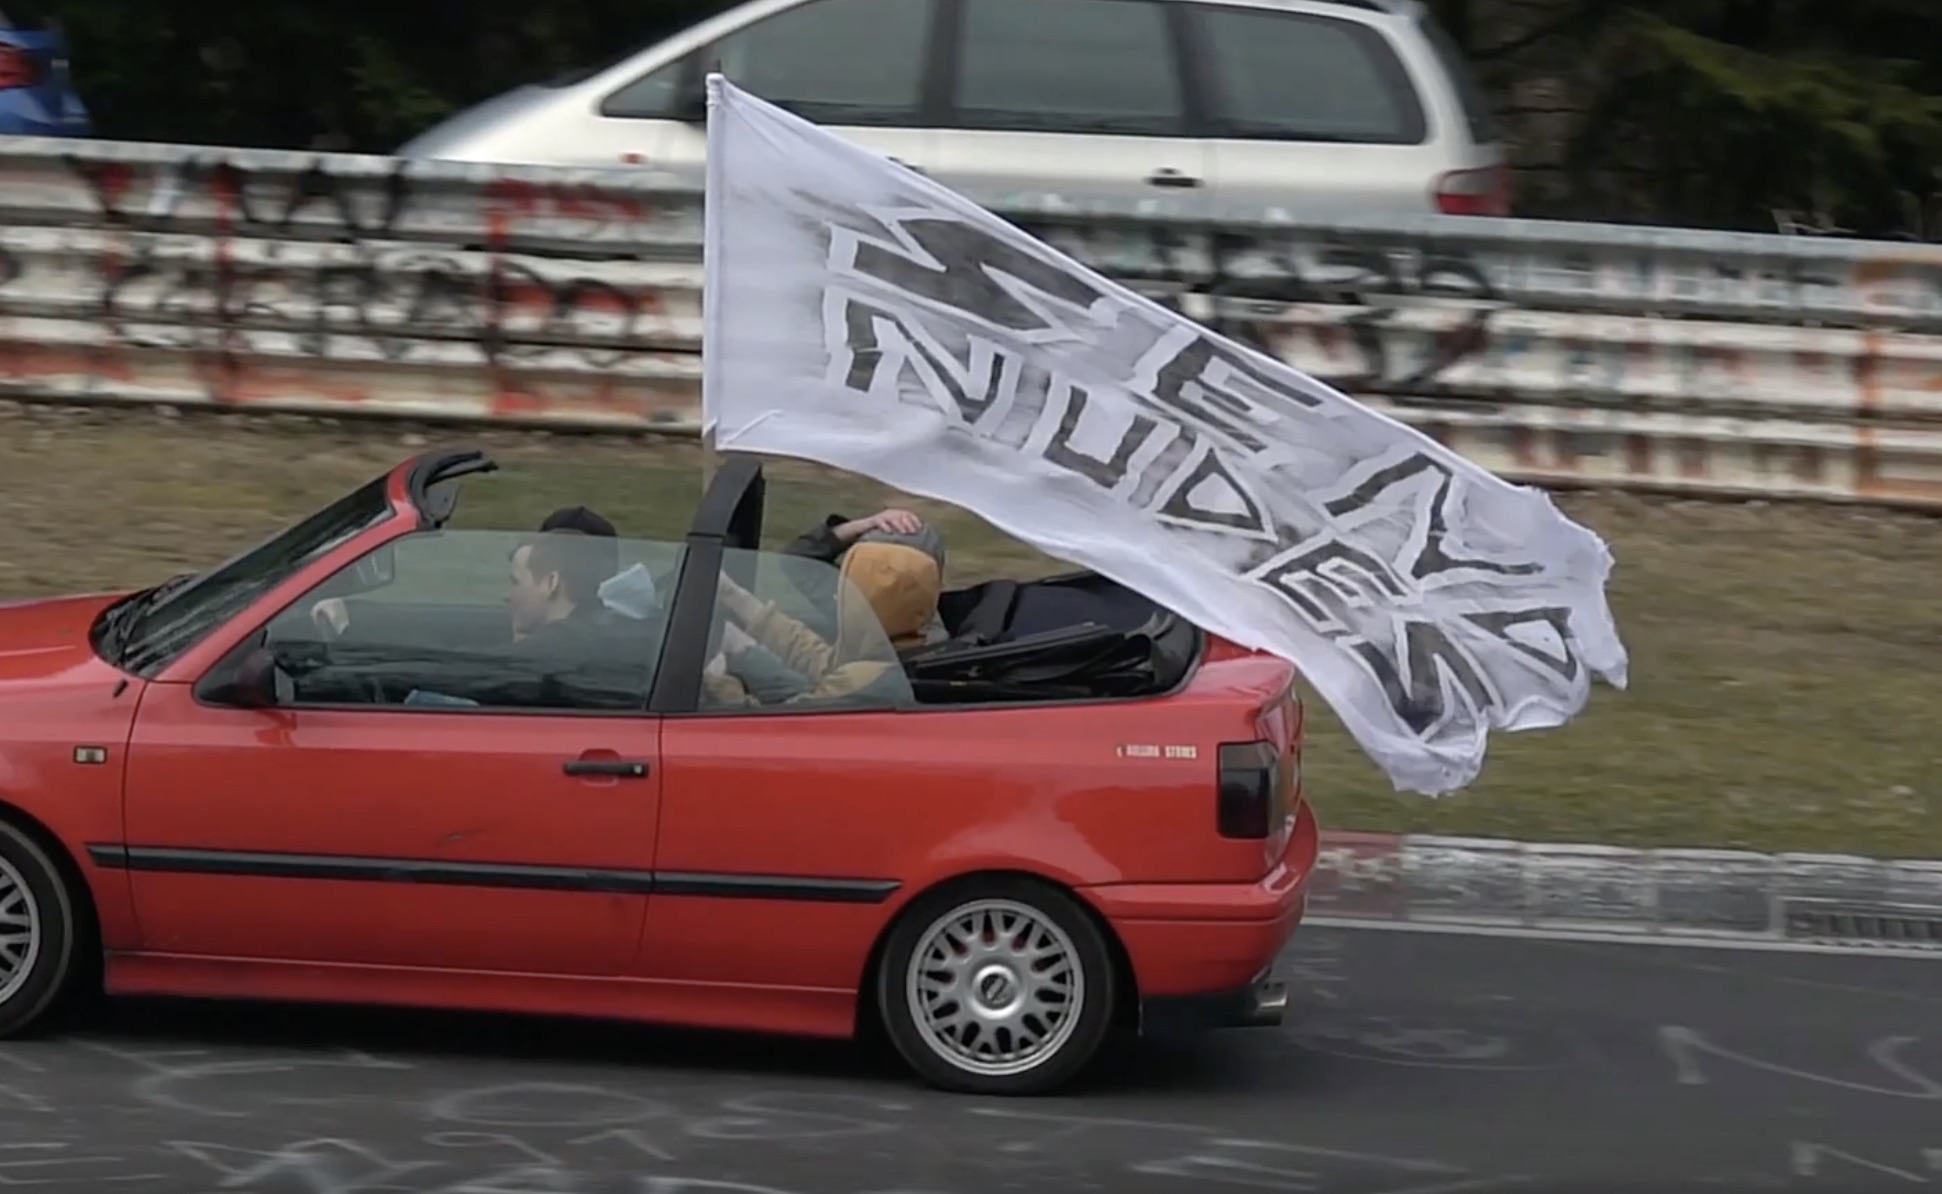 Unhinged: No Filming At The Nurburgring Without Pre-Approval – Bad For The Community?